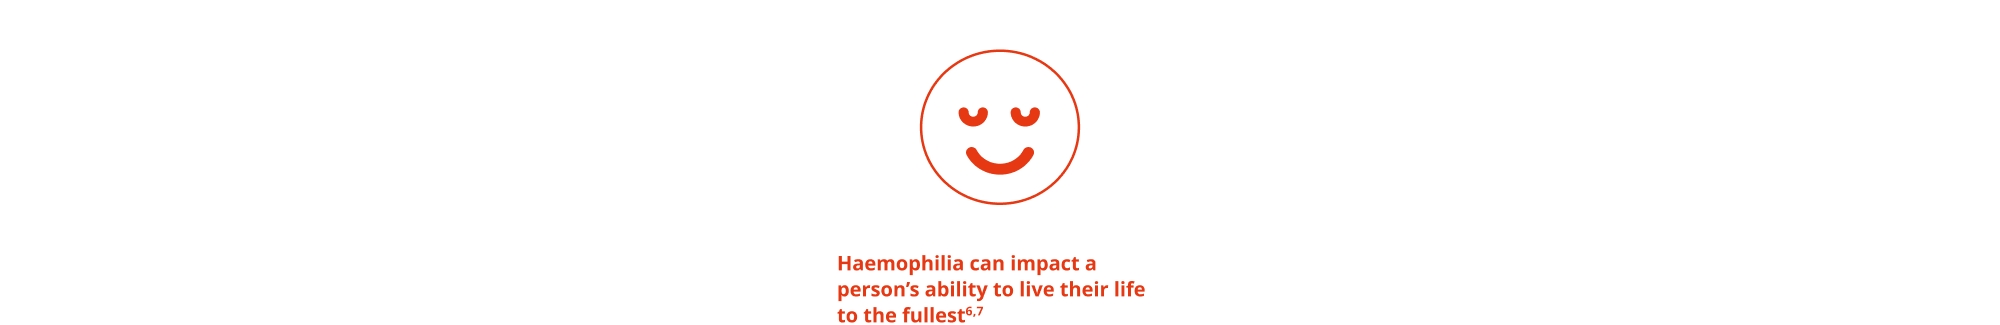 Haemophilia can impact a person’s ability